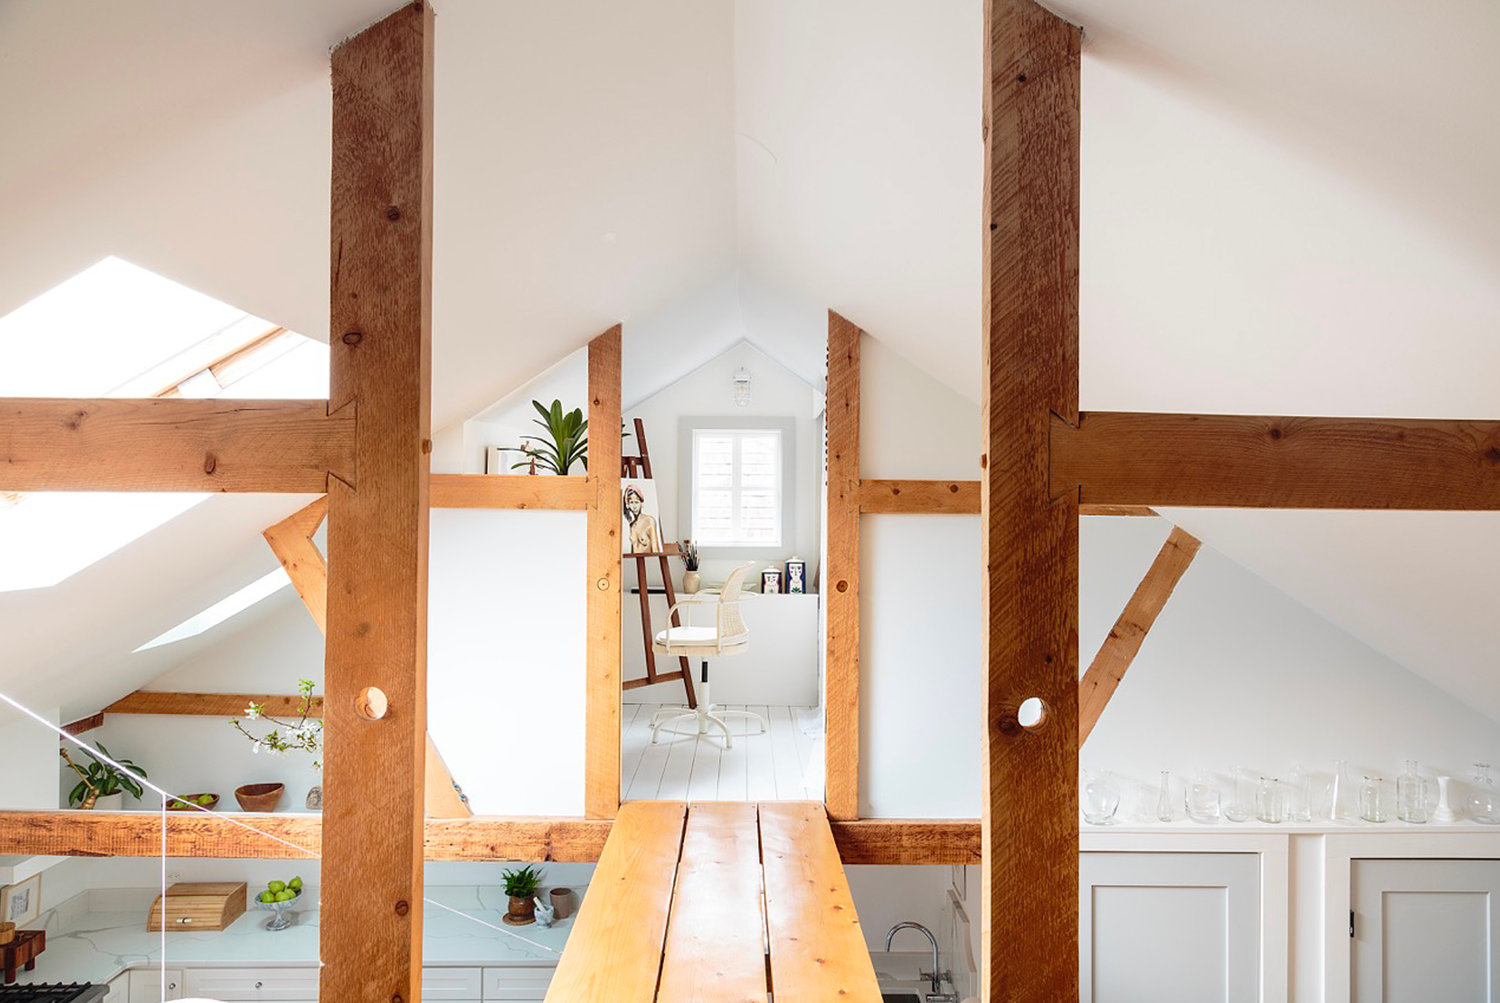 High above the main living areas, the couple set up two small rooms where they can pursue work and hobbies. White walls bounce the light harnessed by several skylights. Wood beams add definition and warmth.